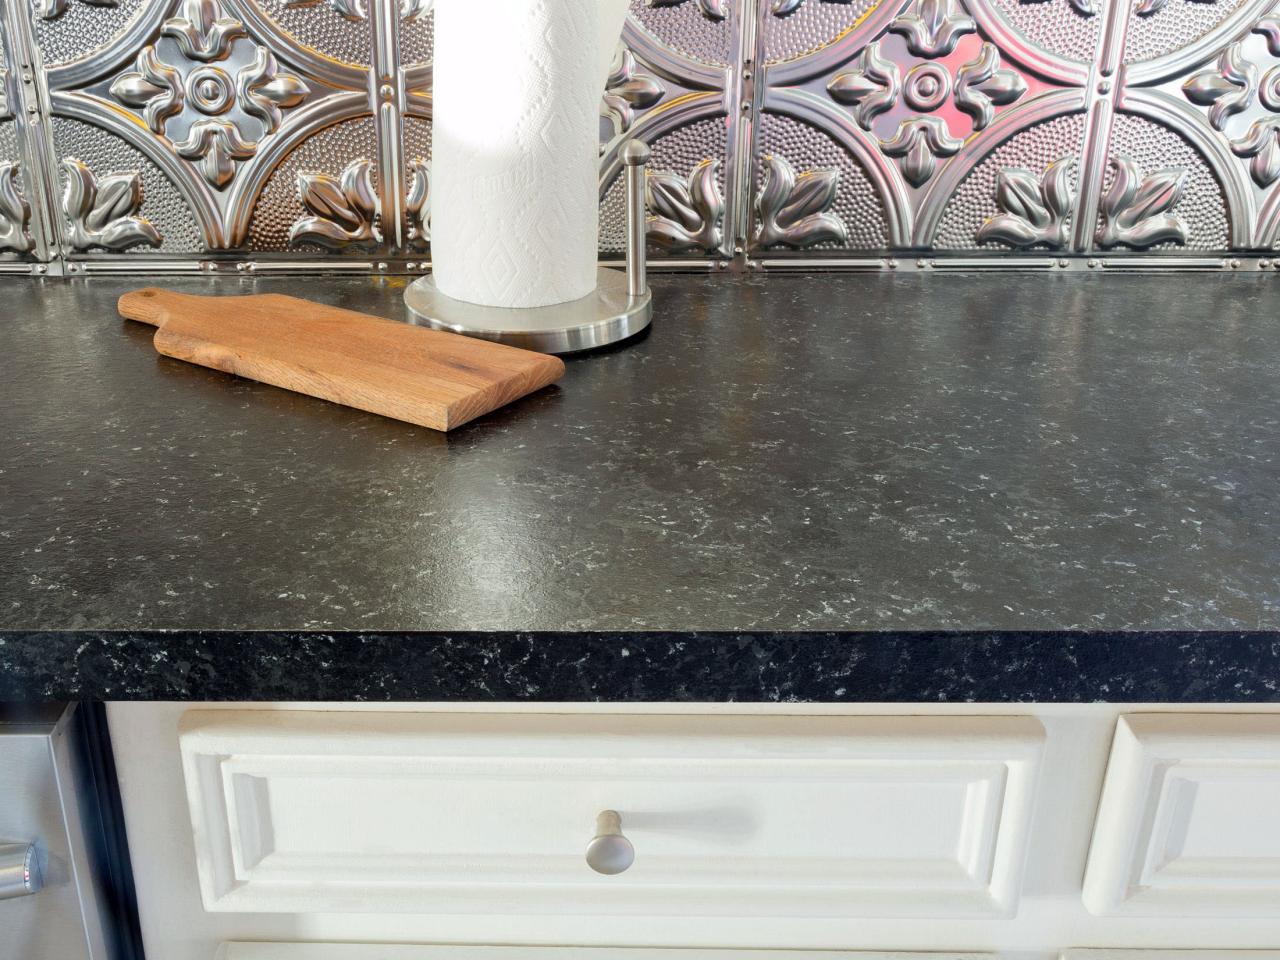 How To Paint A Laminate Countertop, How To Paint Marble Effect On Countertops